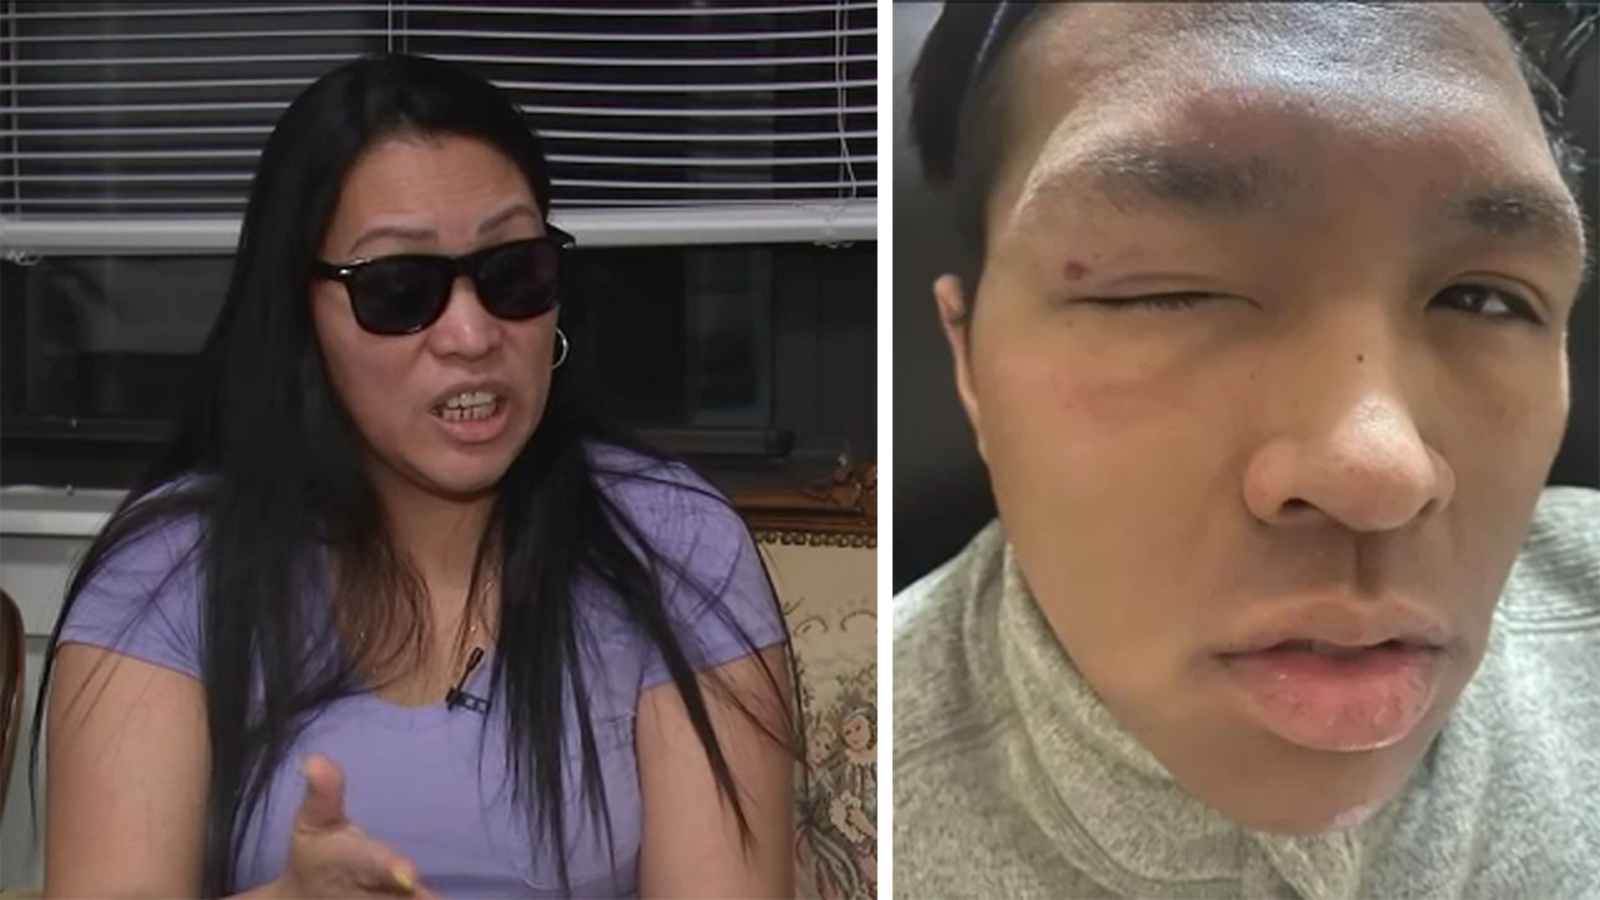 Asian woman speaks out after she and her son physically, verbally attacked in Queens